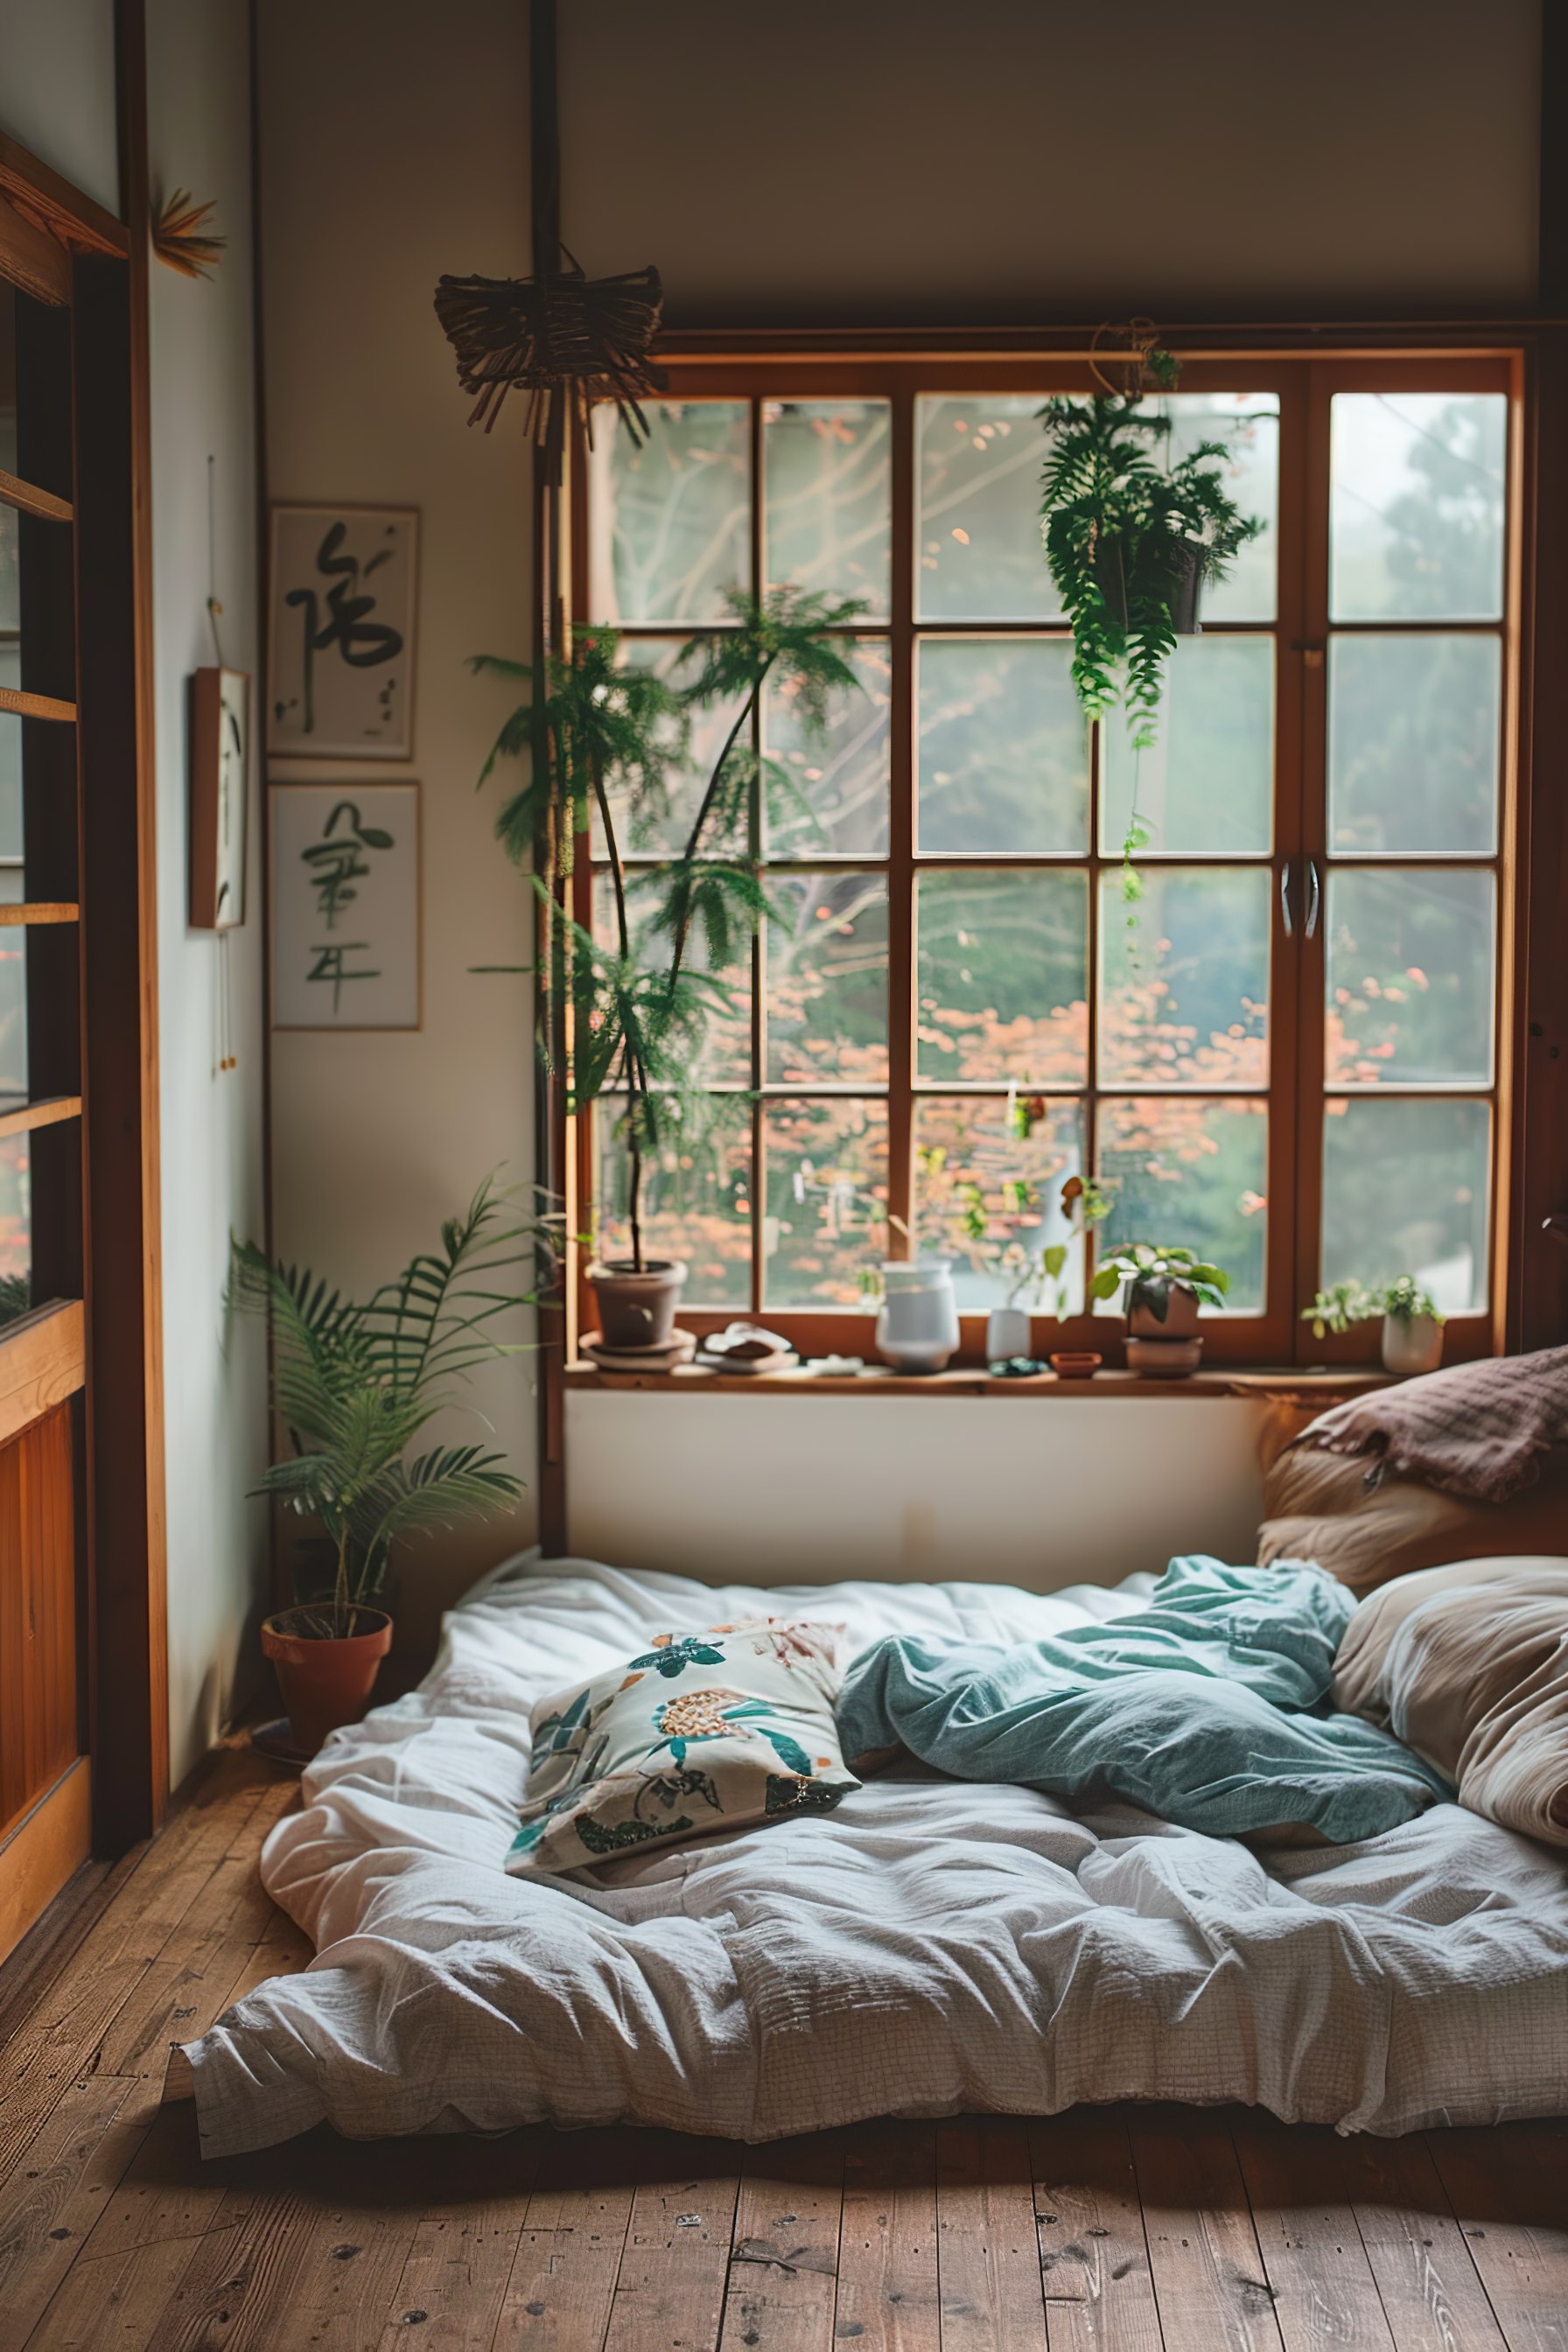 Cozy bedroom corner with a mattress on the floor, large window, hanging plants, and Asian-style wall art.